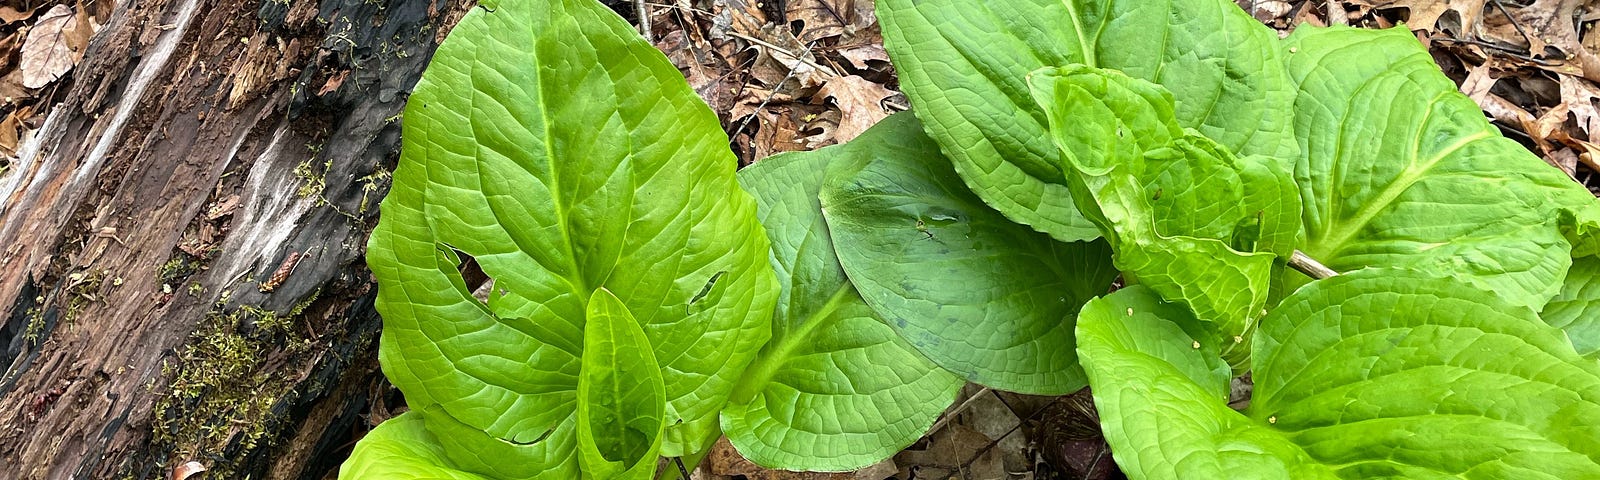 Two large, bright green skunk cabbage plants.